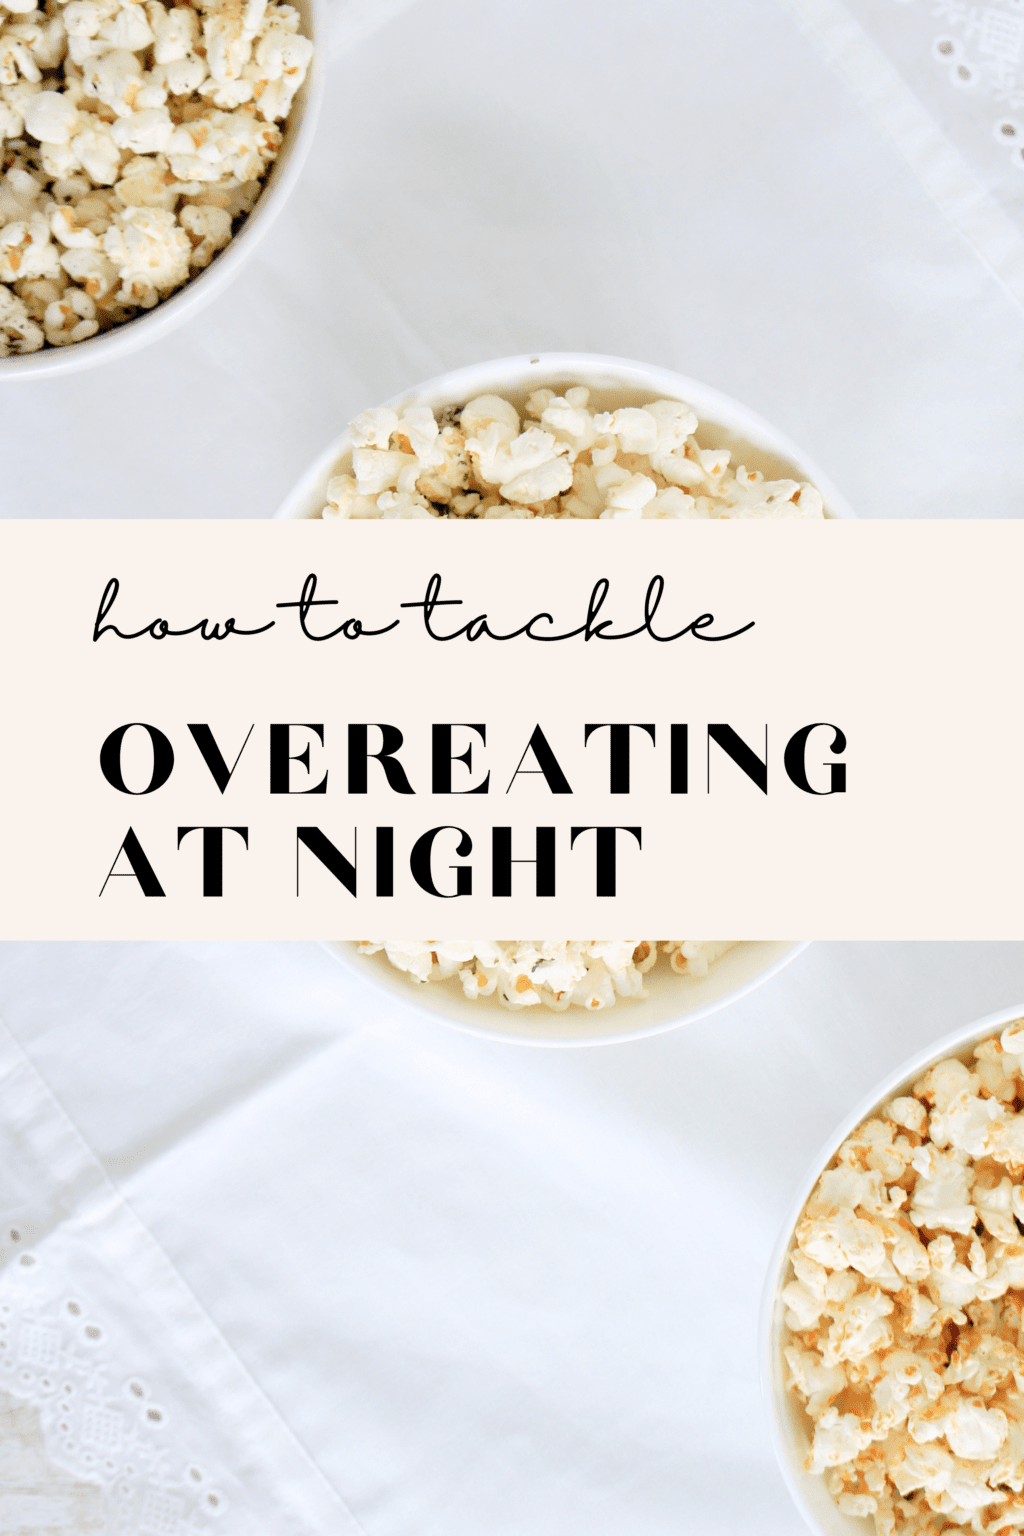 Three bowls of popcorn are laid diagonally across a table with a white table cloth. The top left popcorn has rosemary on it, the middle popcorn has butter and salt on it and the bottle right popcorn has siracha on it. There is text overlay that says "how to tackle overeating at night" 